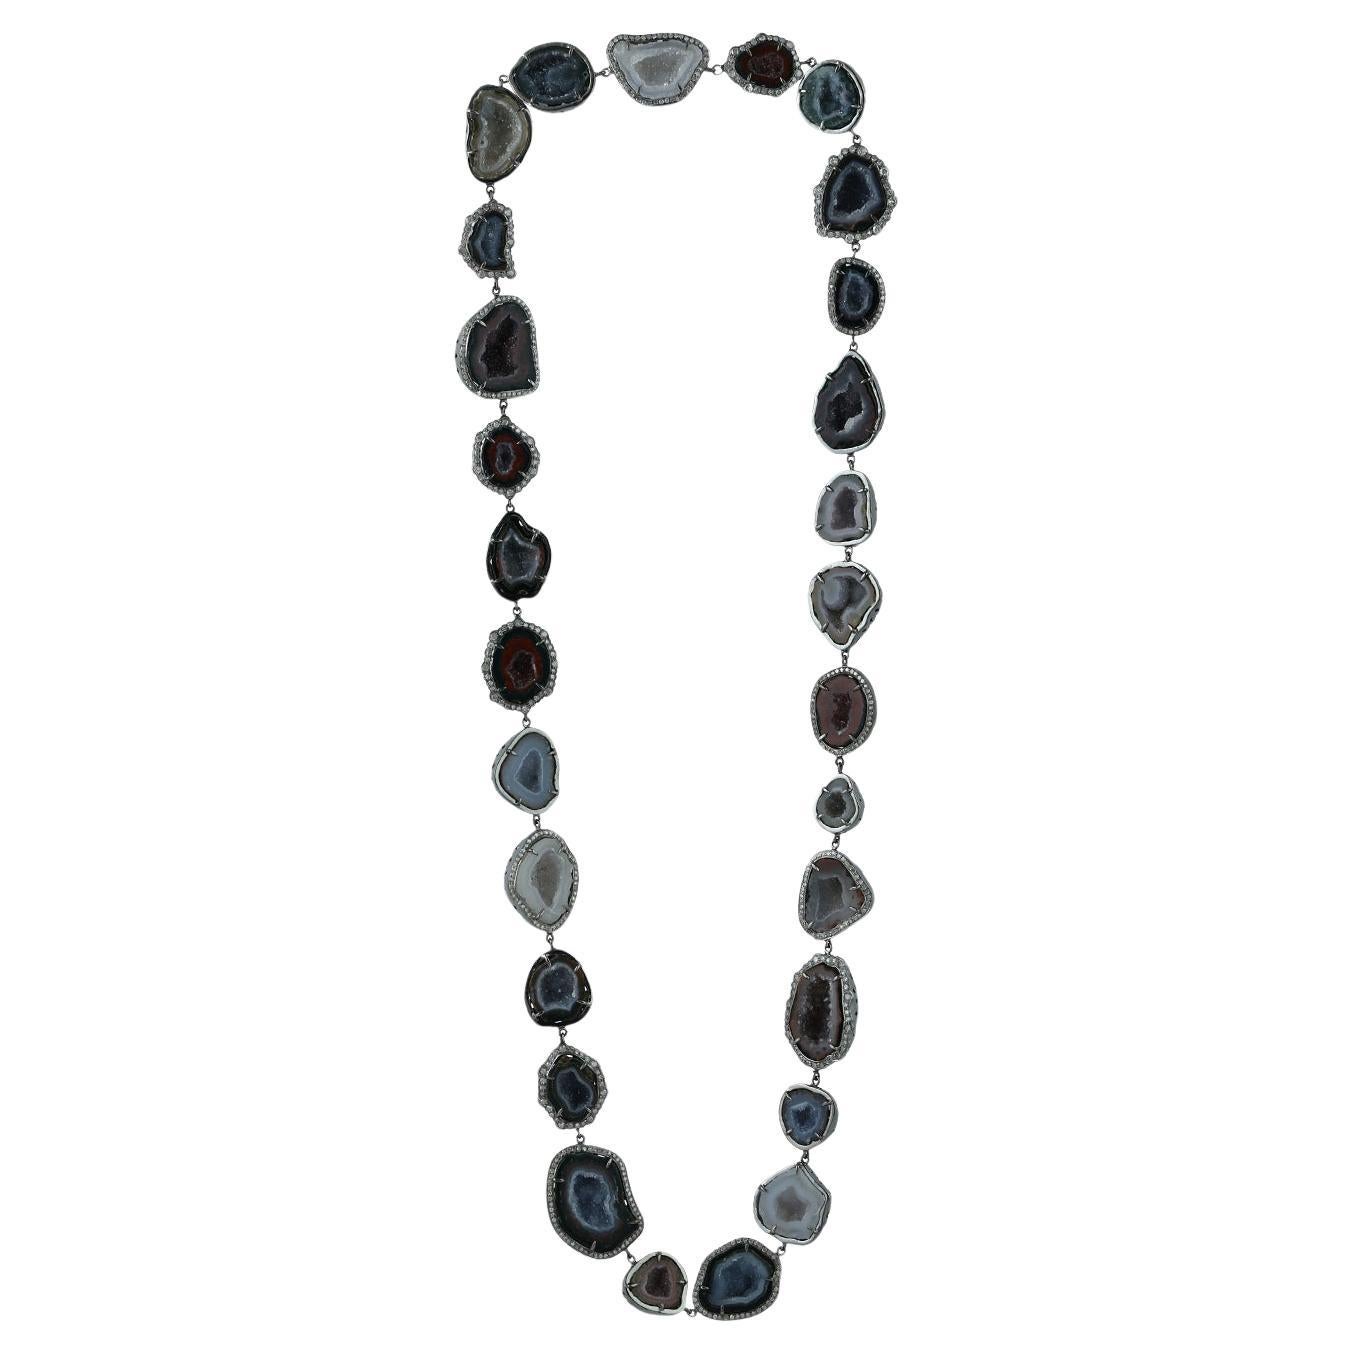 351.77ct Sliced Geode Chain Neckalce With Diamonds For Sale